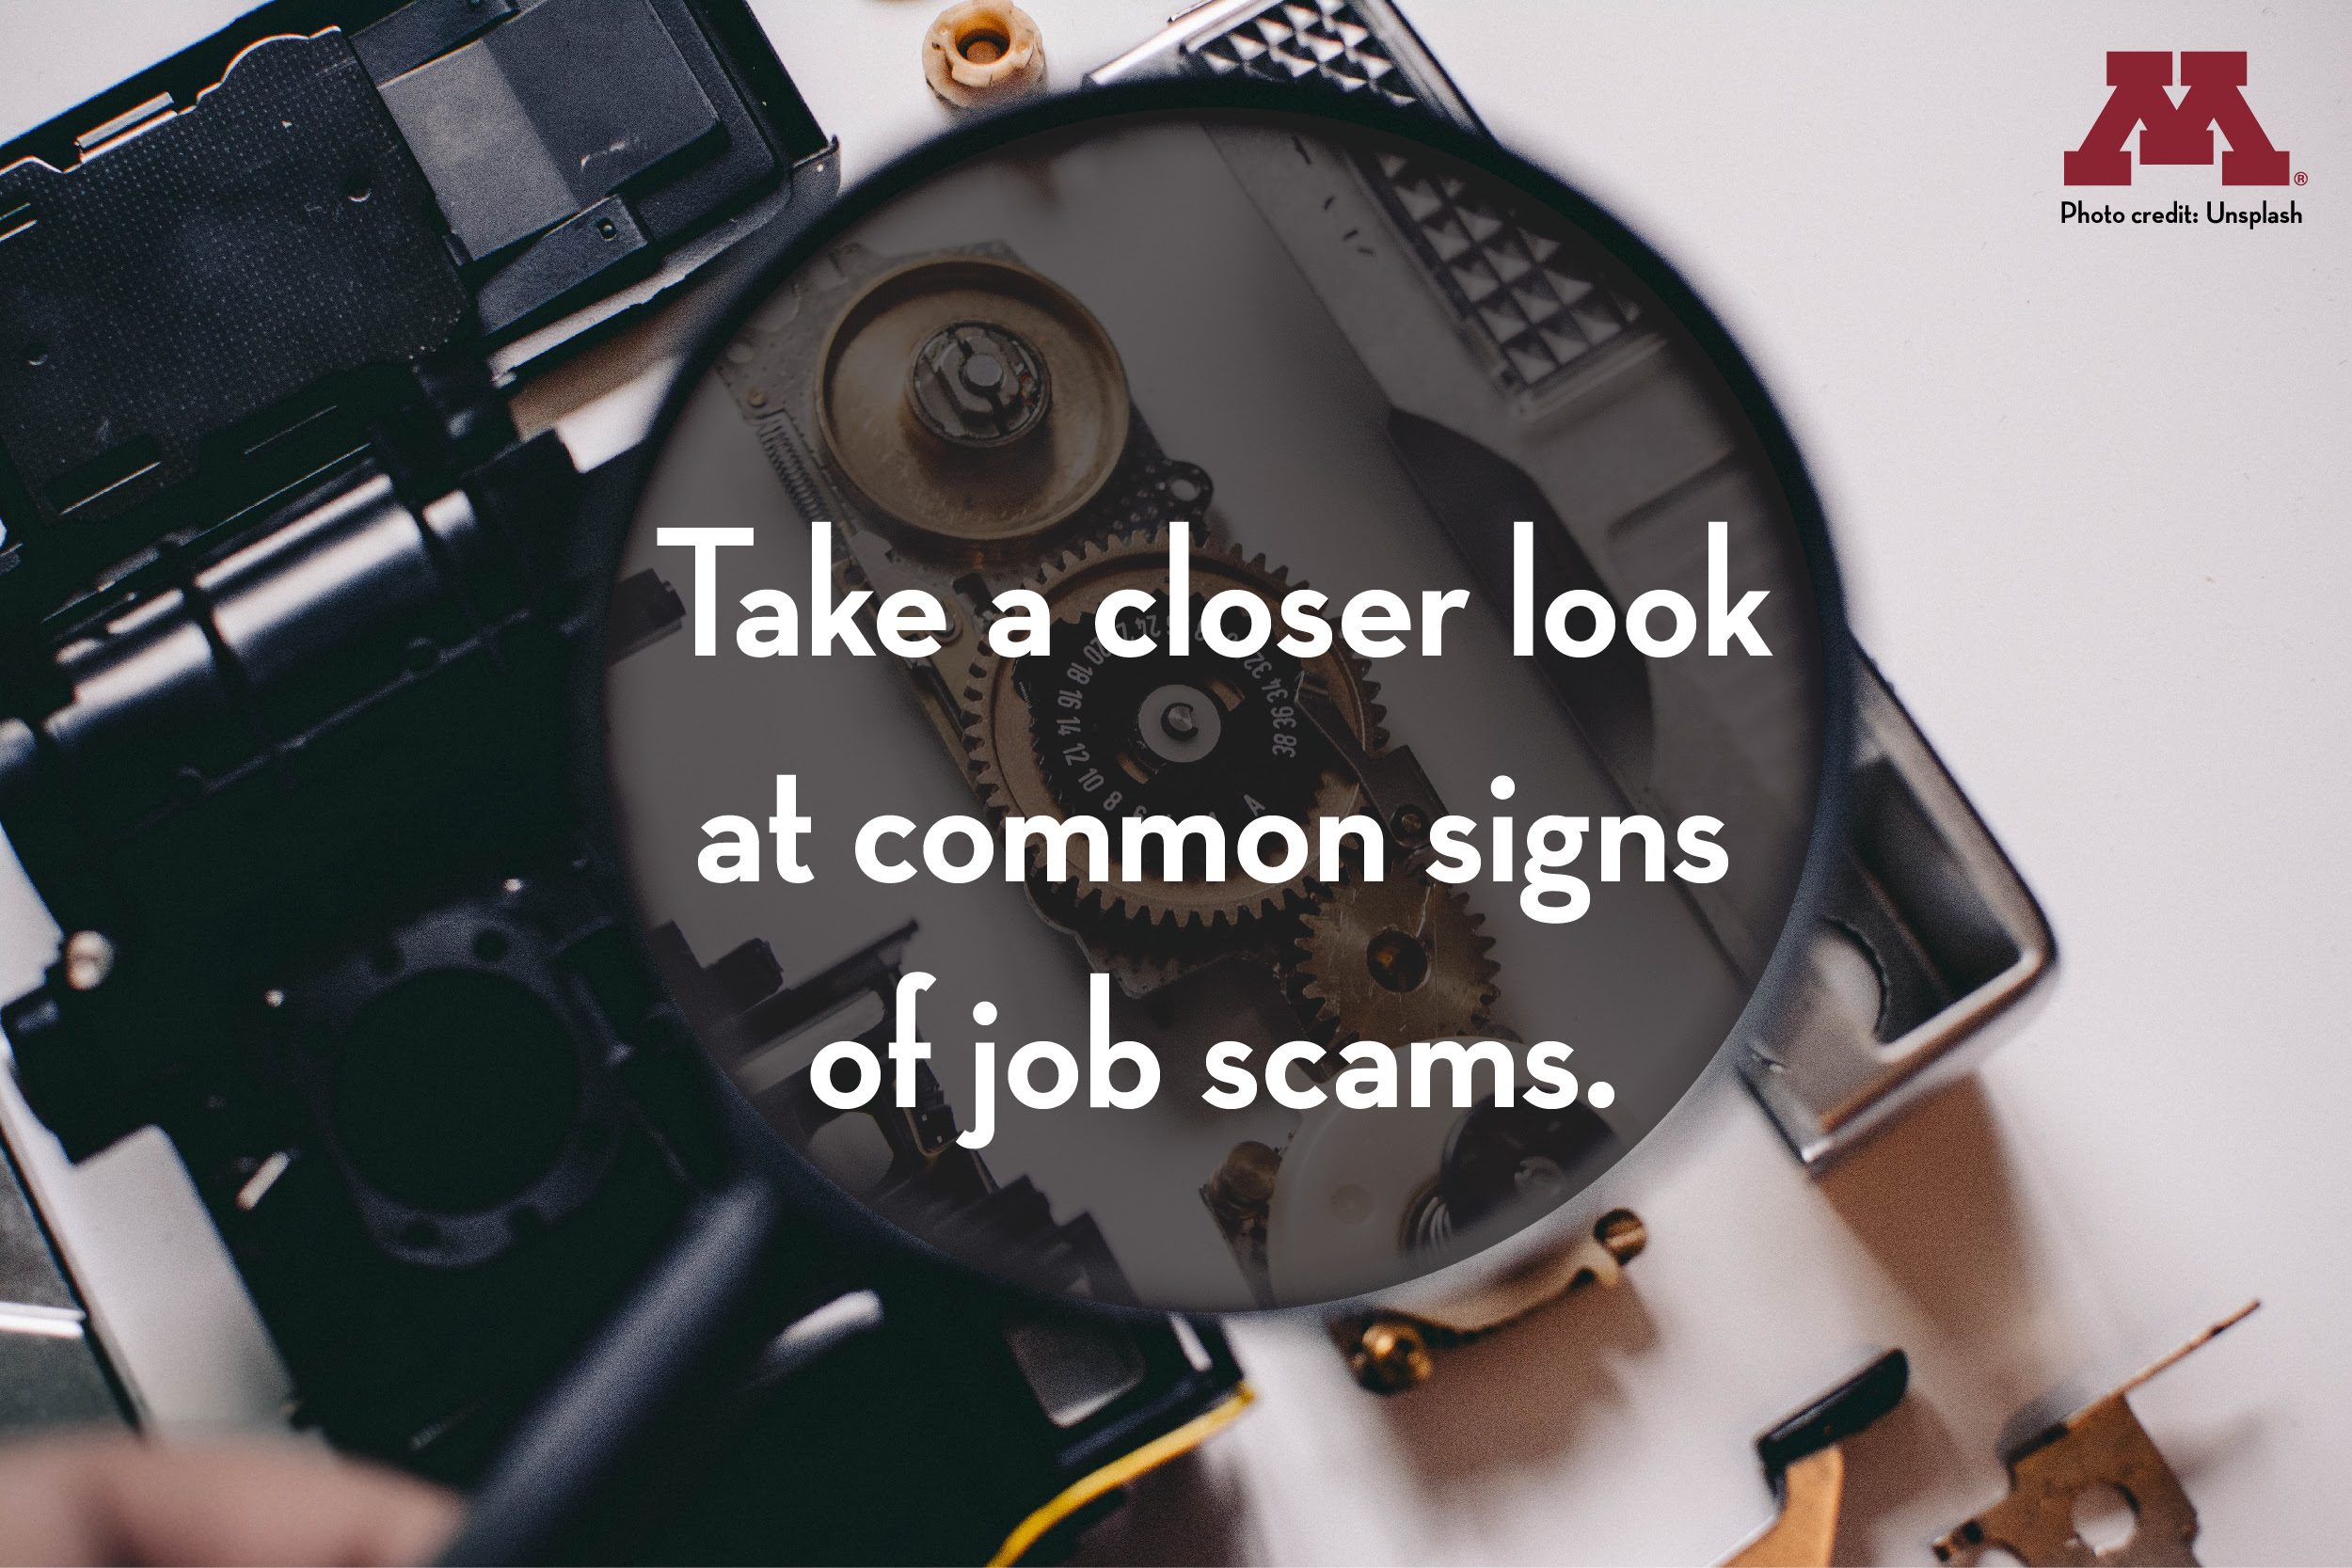 Magnifying glass over computer part with text: Take a closer look at common signs of job scams.